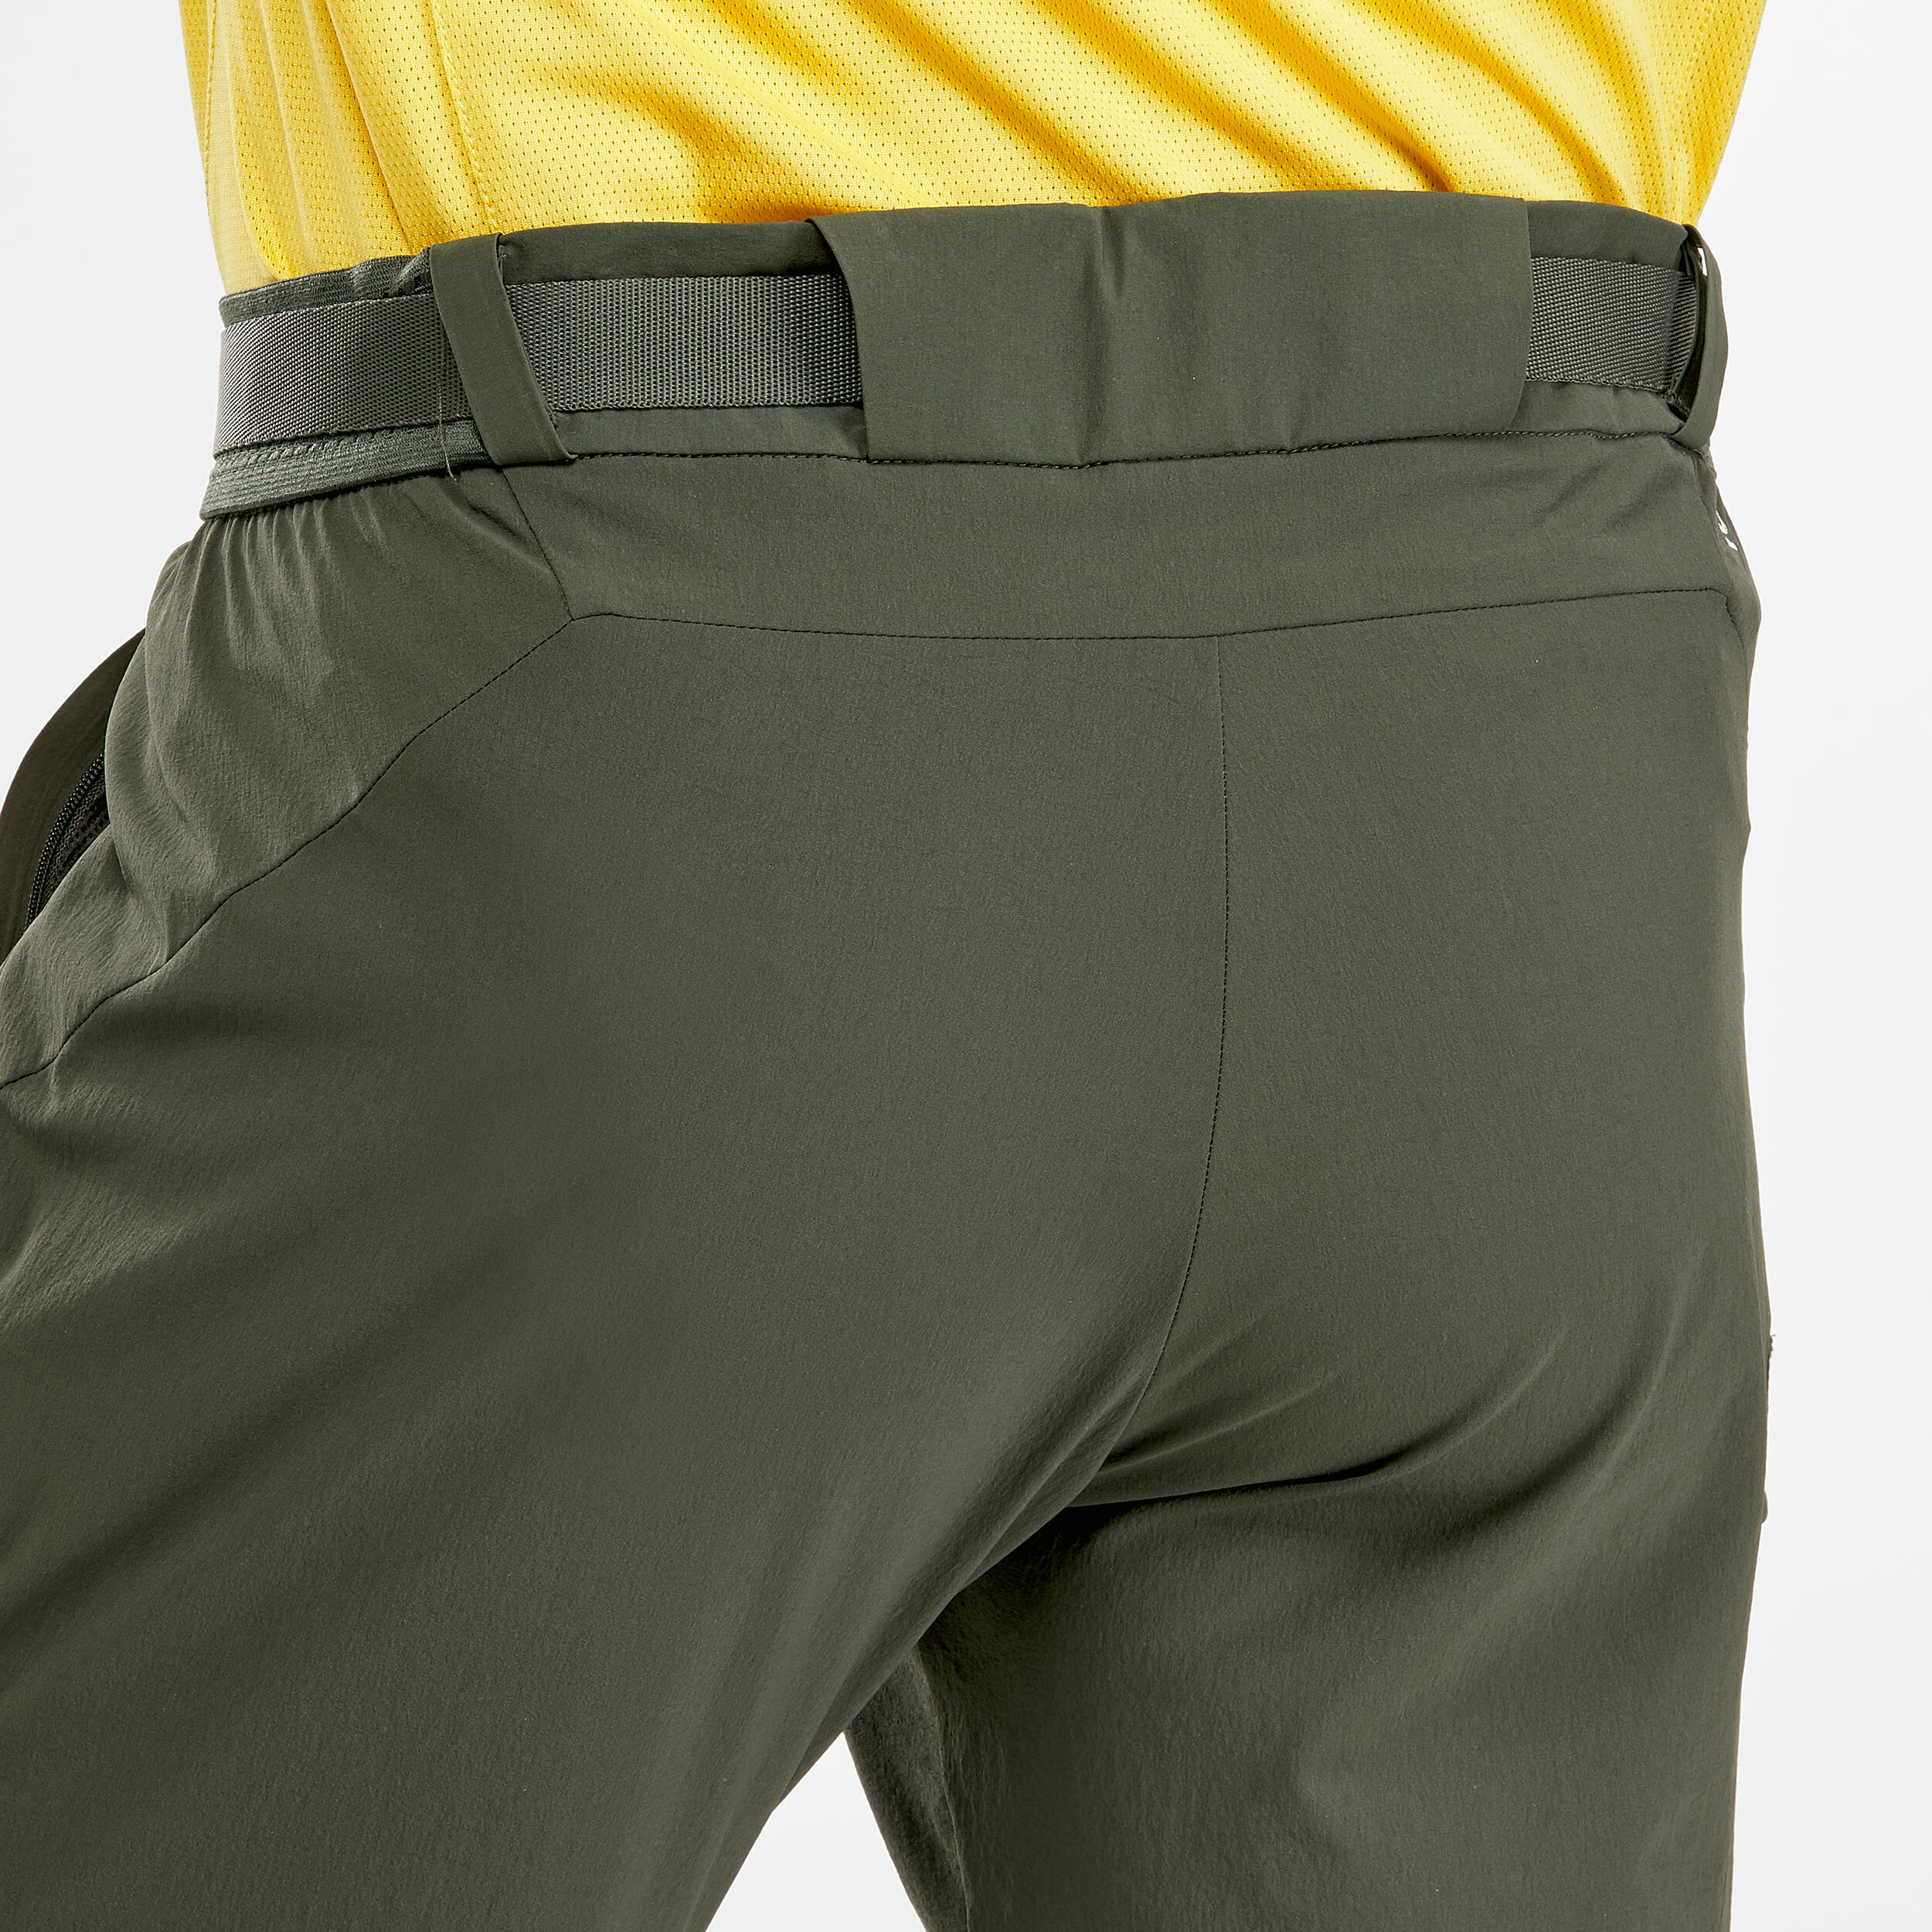 Men's Hiking Trousers MH500 6/8